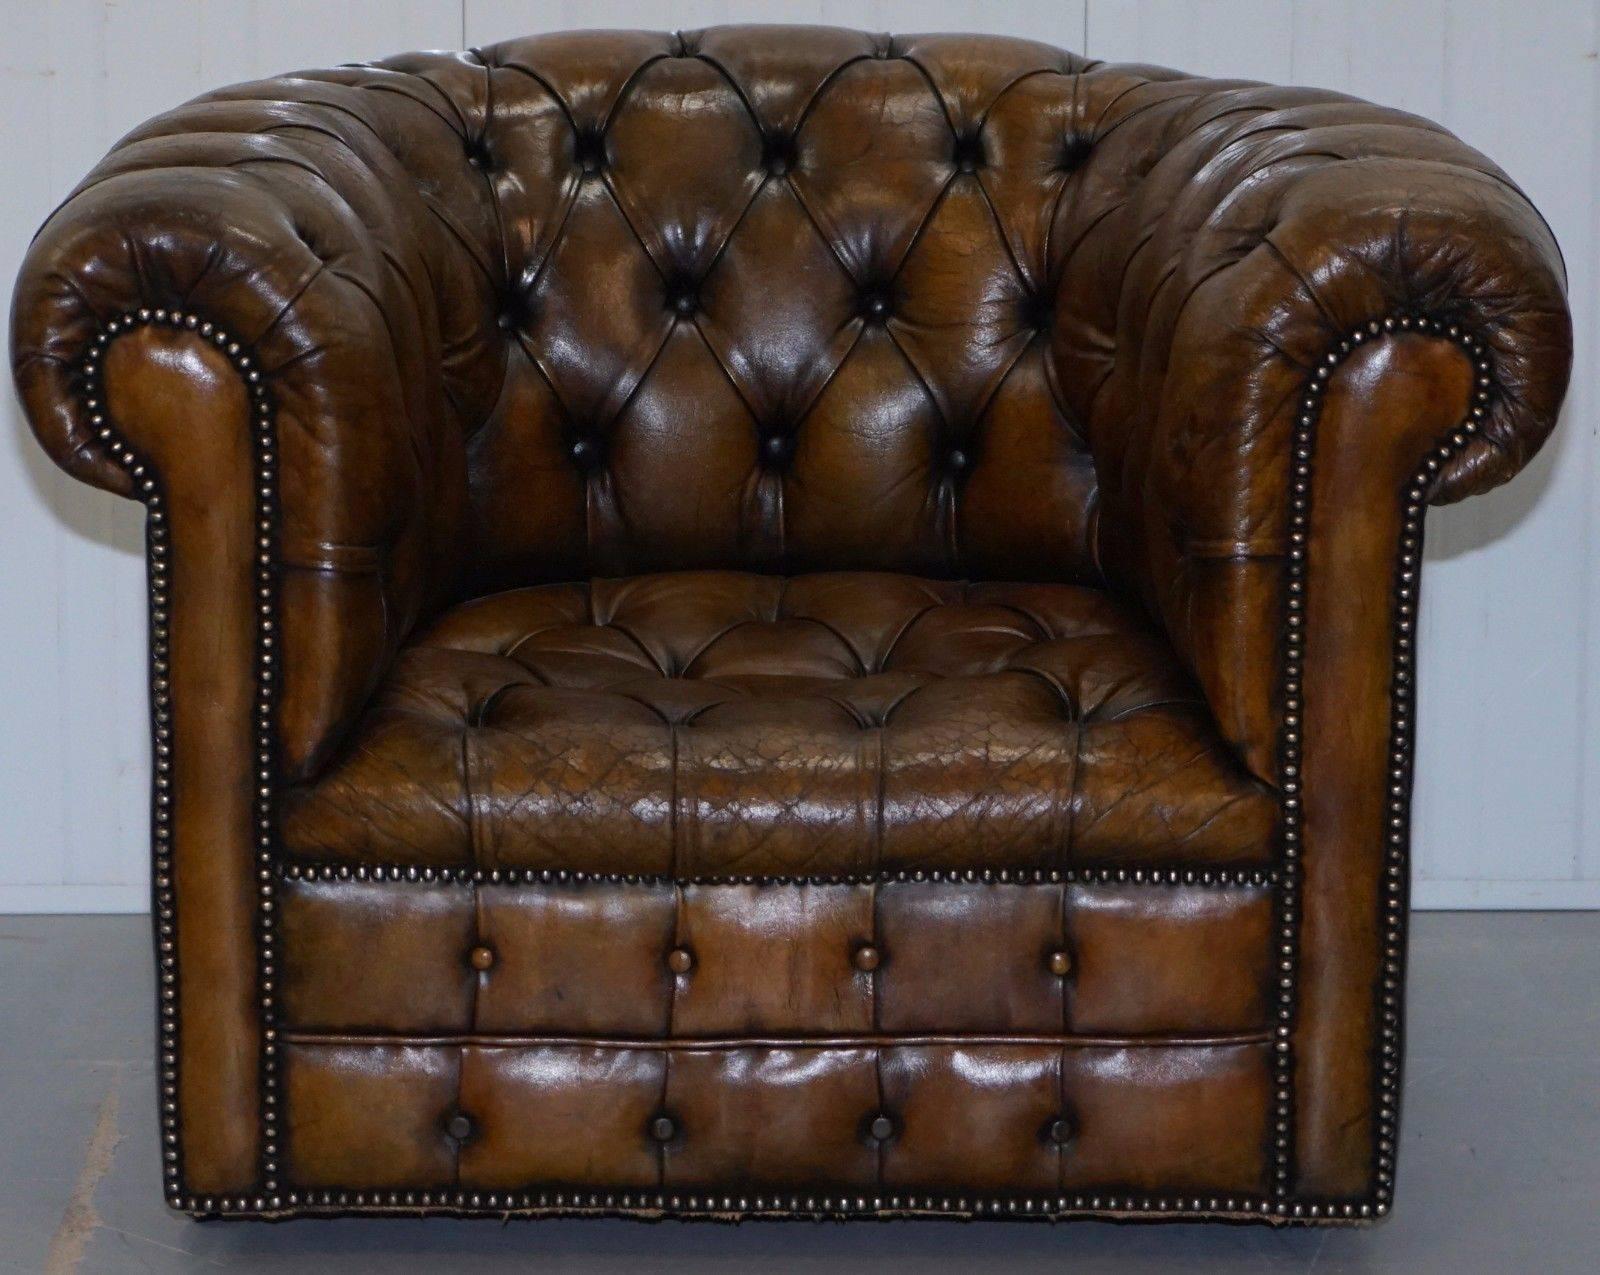 Wimbledon-Furniture is delighted to offer for sale this exceptionally rare original 1930’s fully buttoned Chesterfield club armchair in newly restored condition 

There is around 50-100 high definition super-sized pictures at the bottom of this